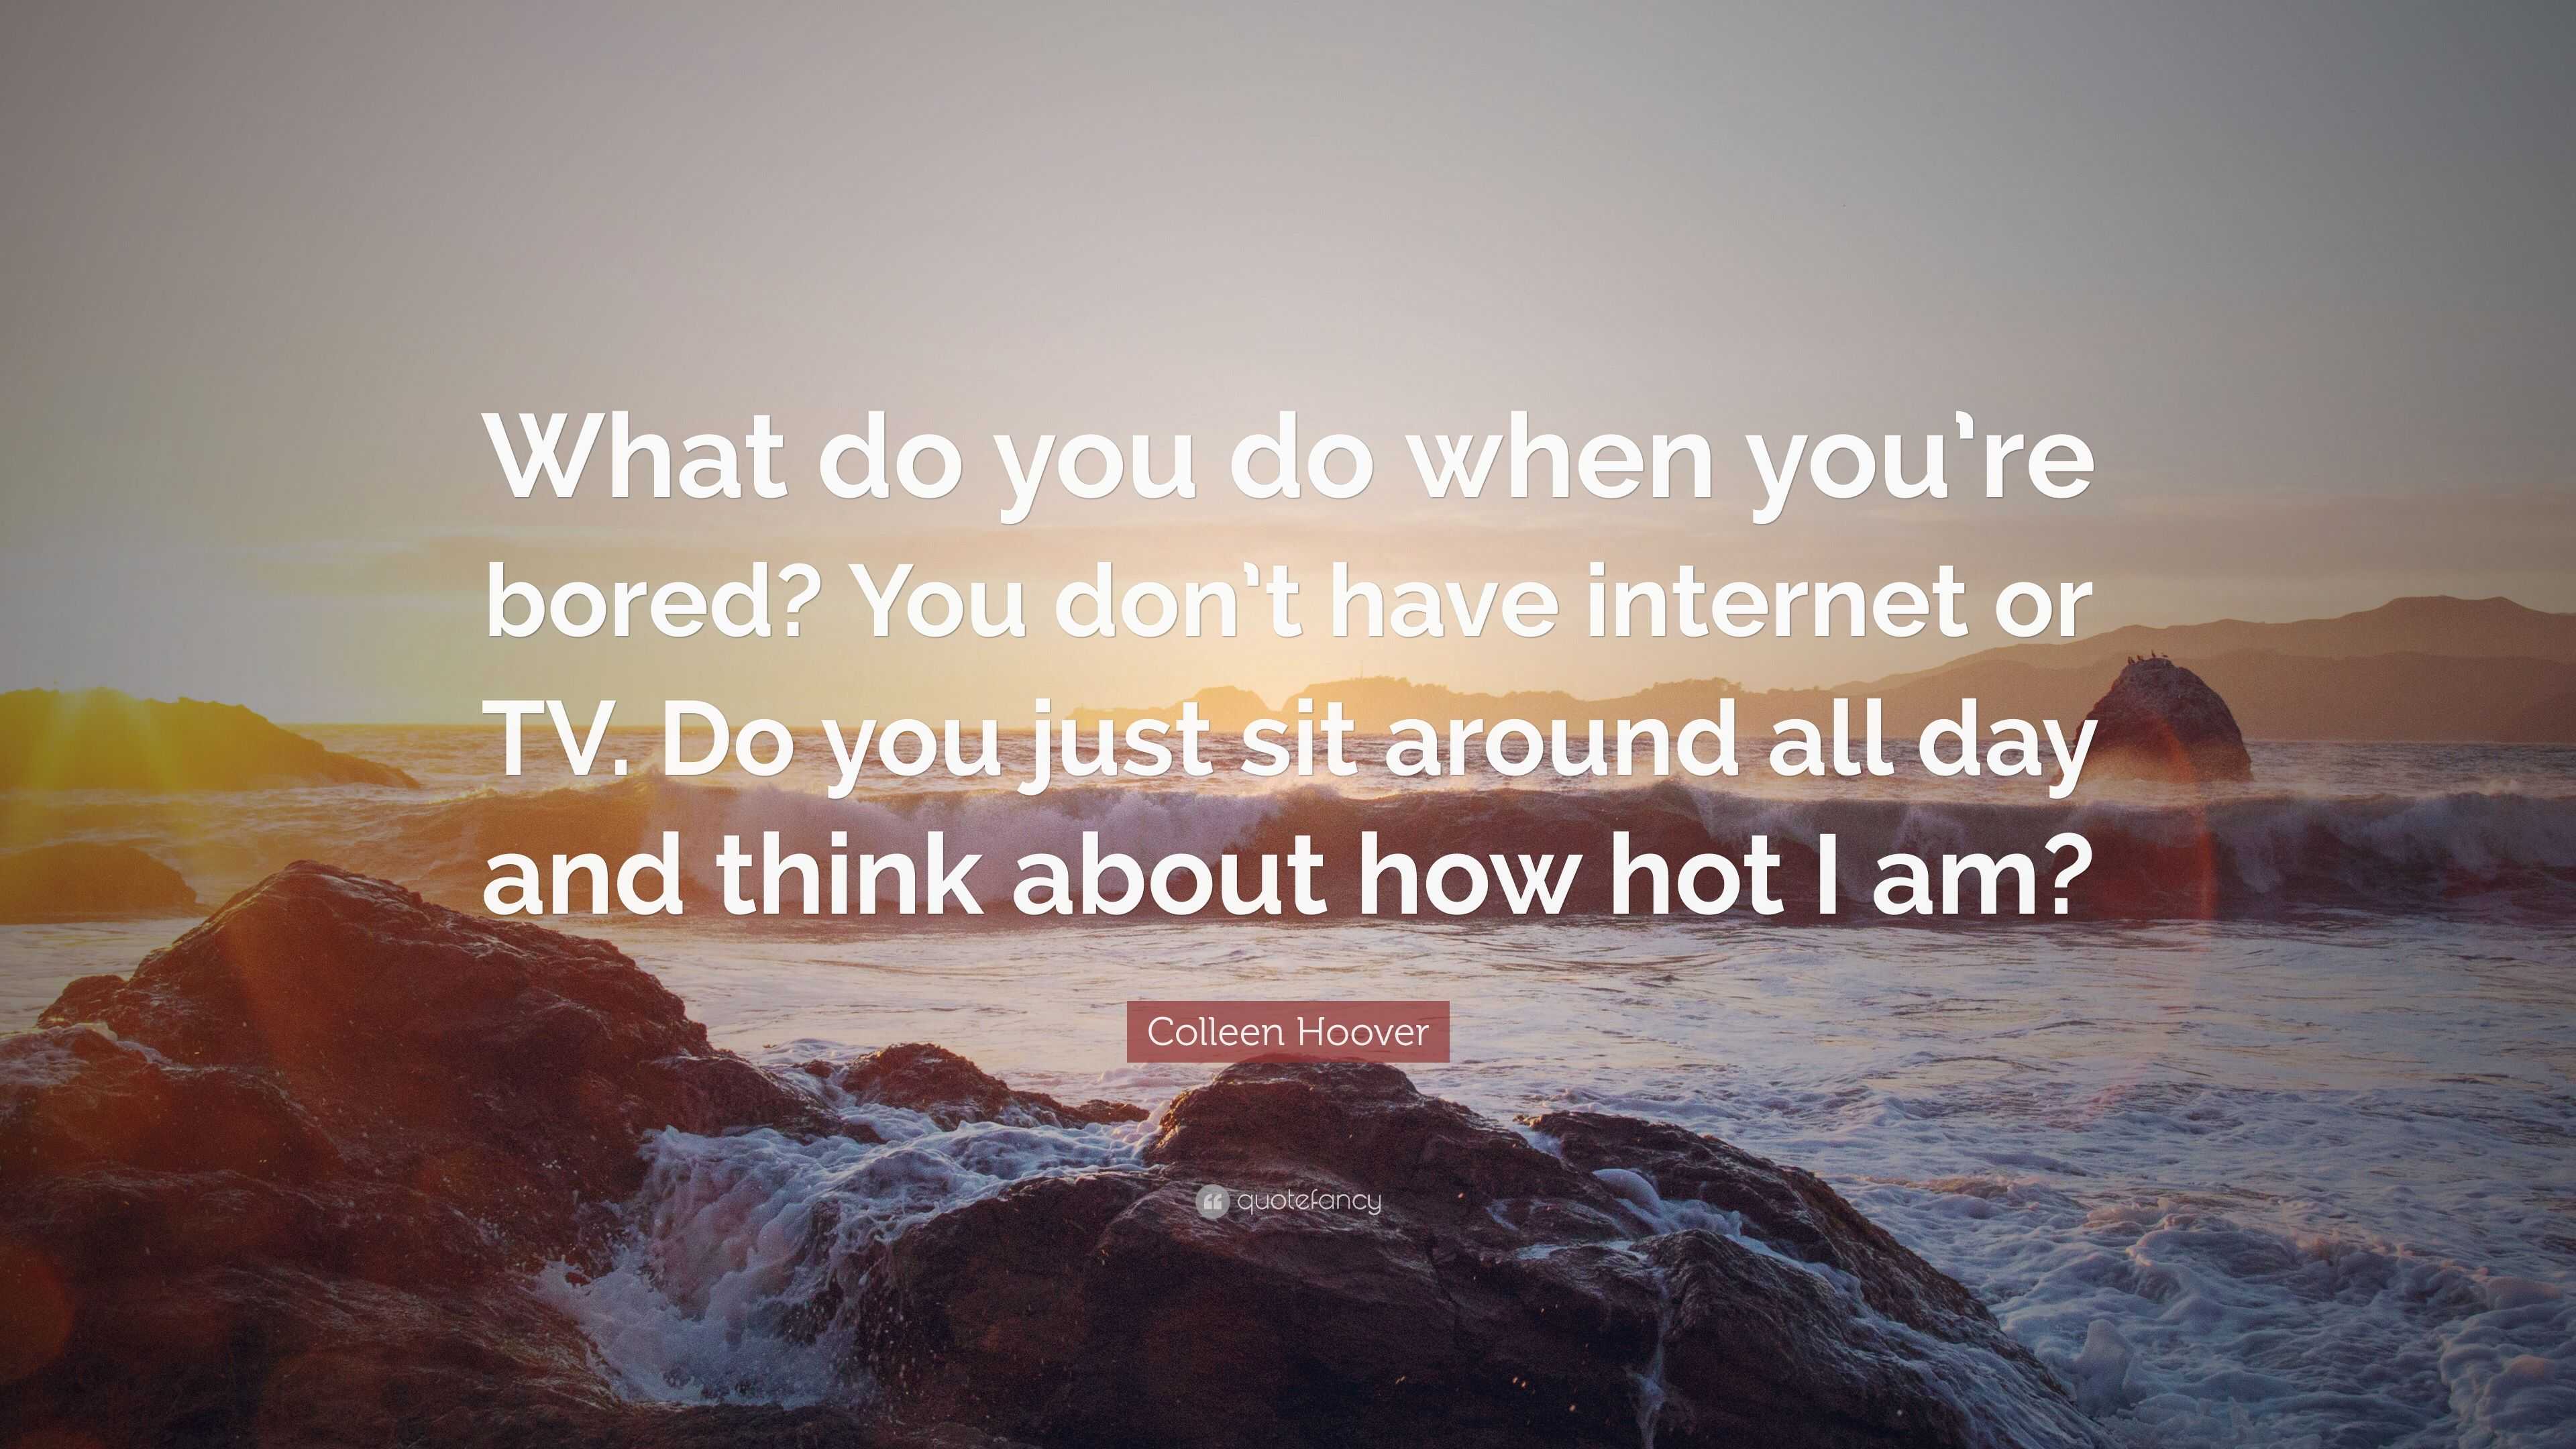 Colleen Hoover Quote: “What do you do when you're bored? You don't have  internet or TV. Do you just sit around all day and think about how hot ...”